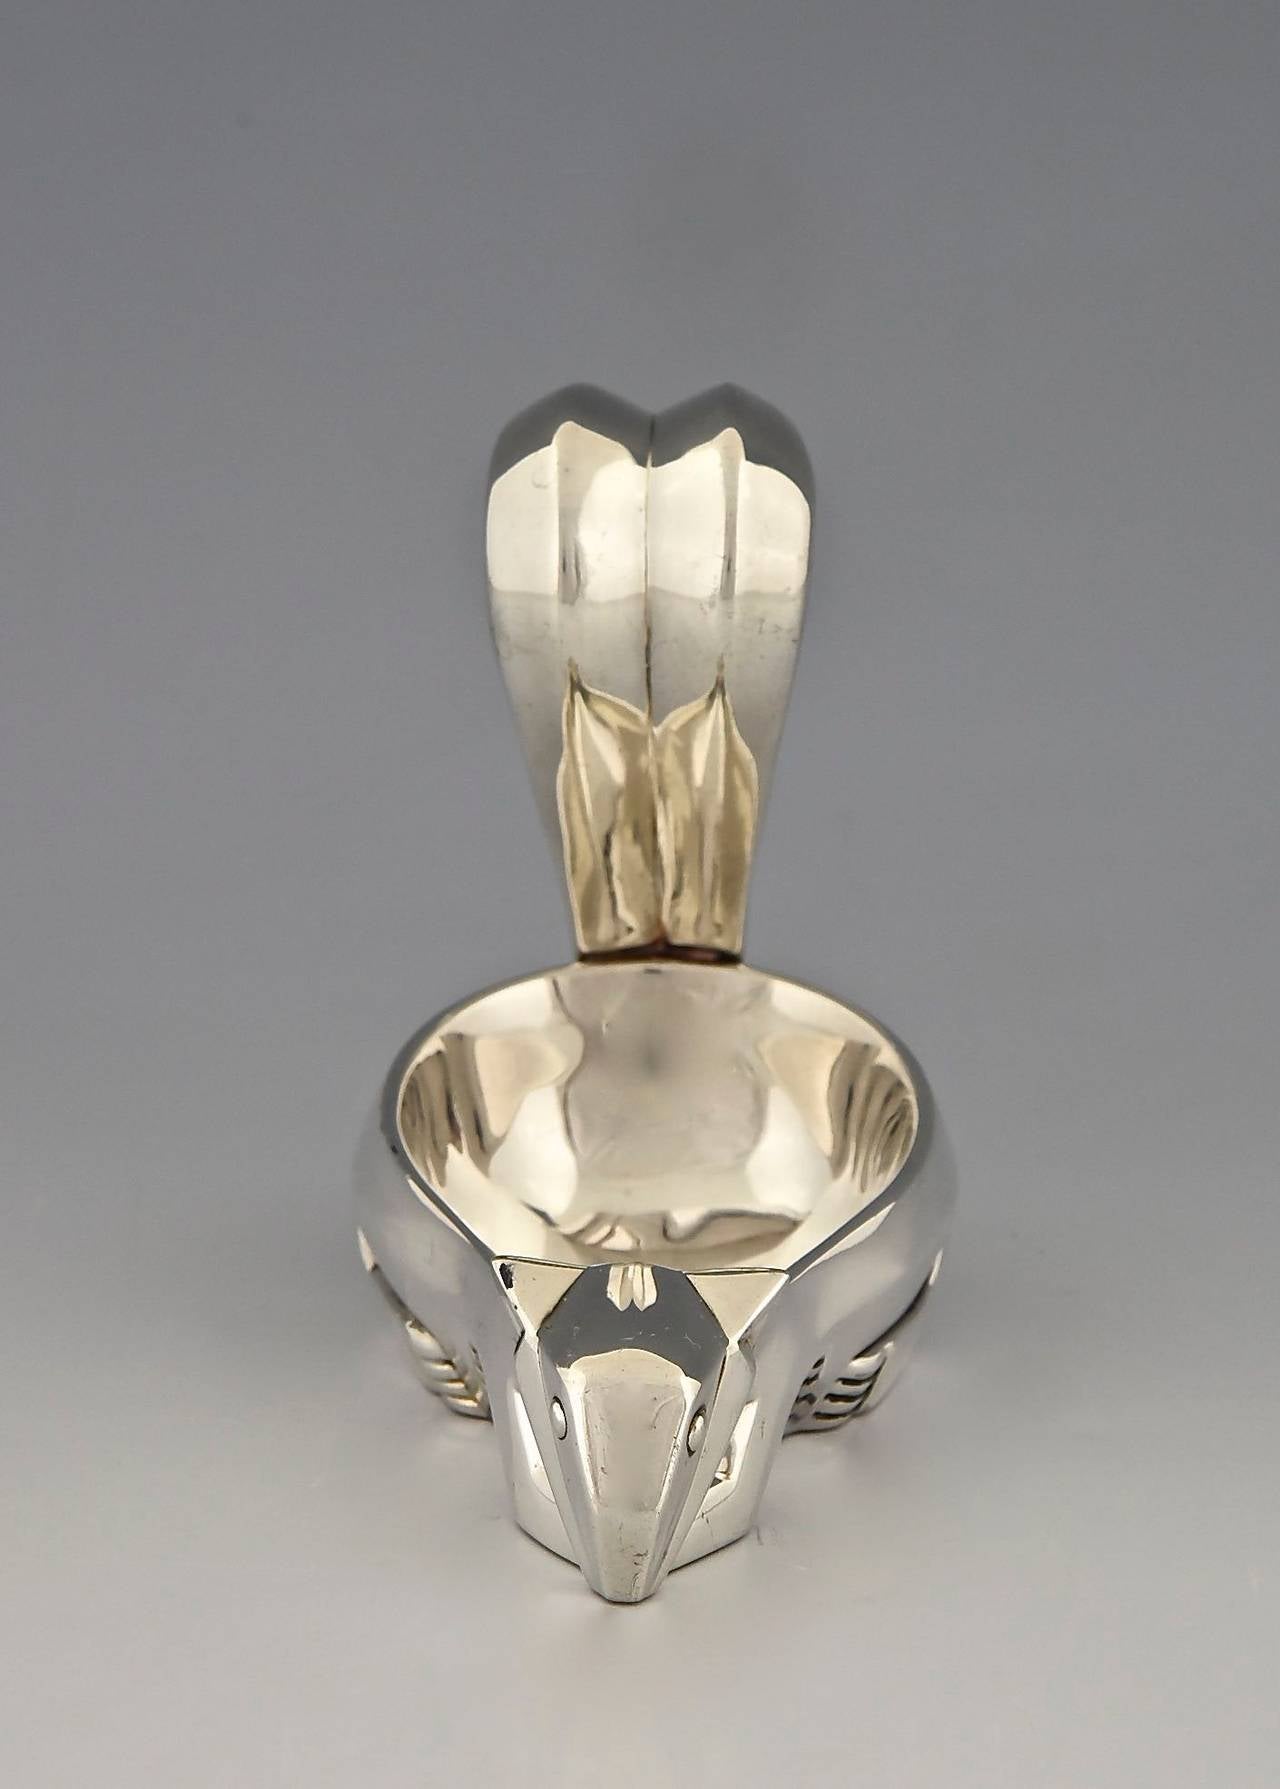 Silvered Art Deco Squirrel Tray Designed by A. De Ribes for Christofle, Silver Plated